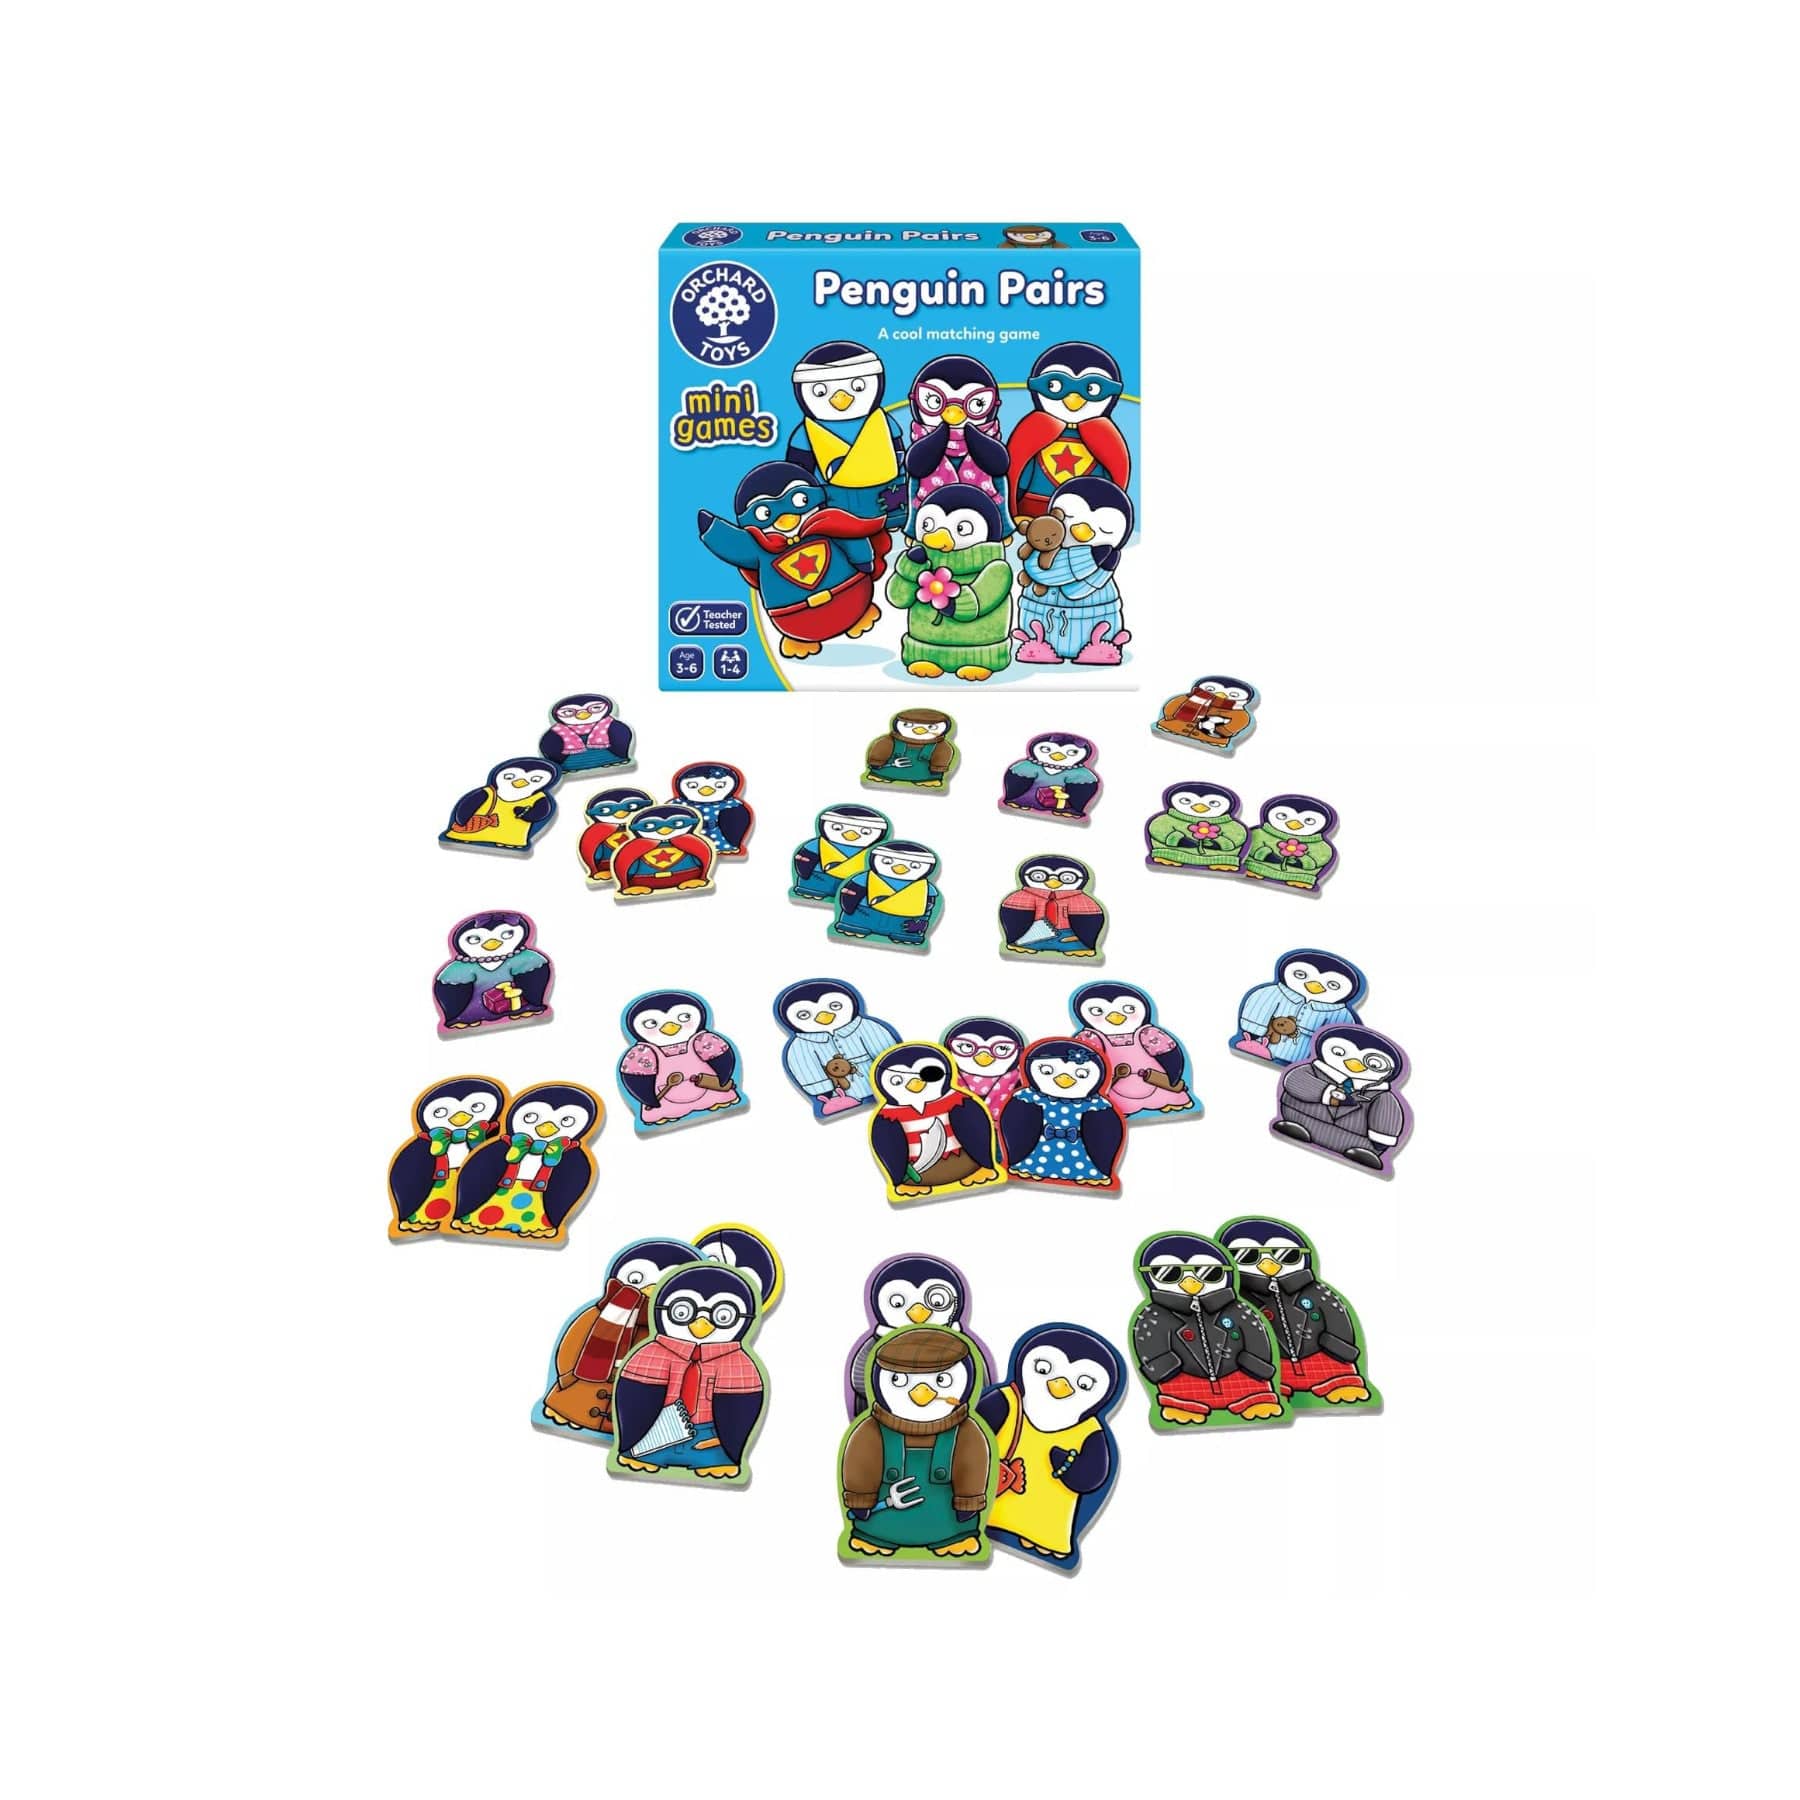 Alt text: Colorful Penguin Pairs board game with cartoon penguin illustrations, spread out matching cards, and game box visible for children's memory game.